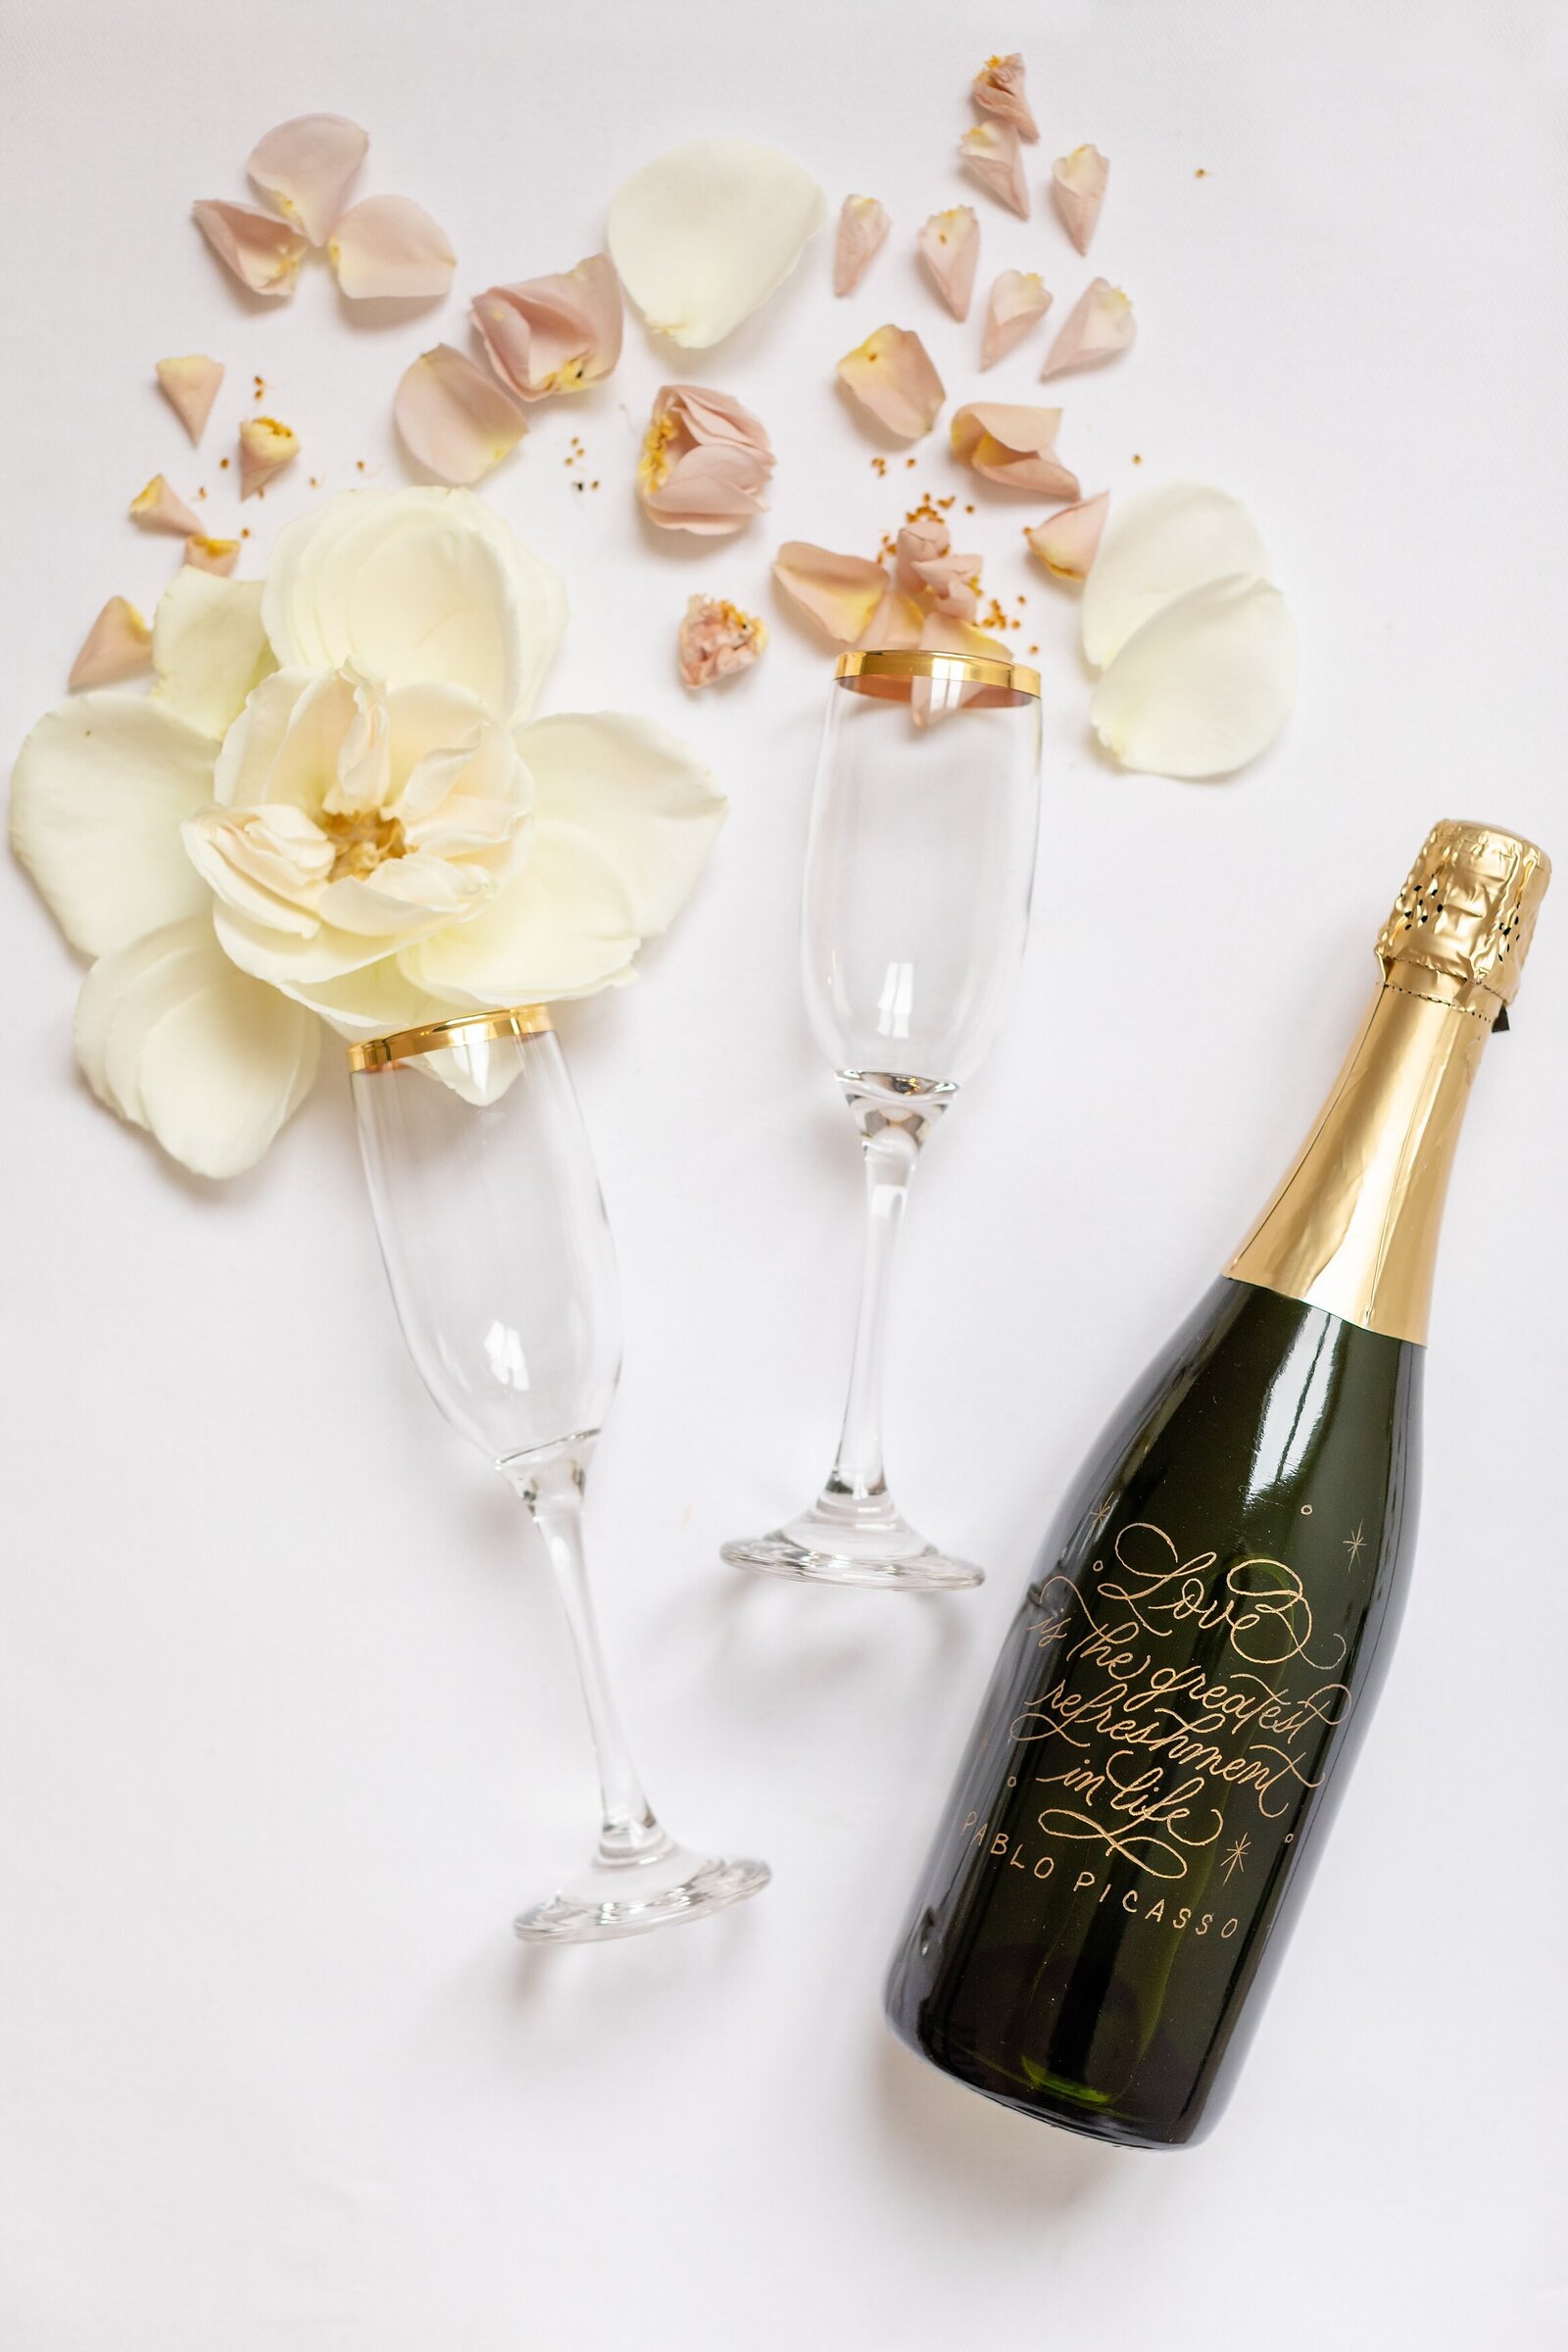 champagne-bottle-with-florals-coming-out-of-glasses-la-petite-chapelle-wedding